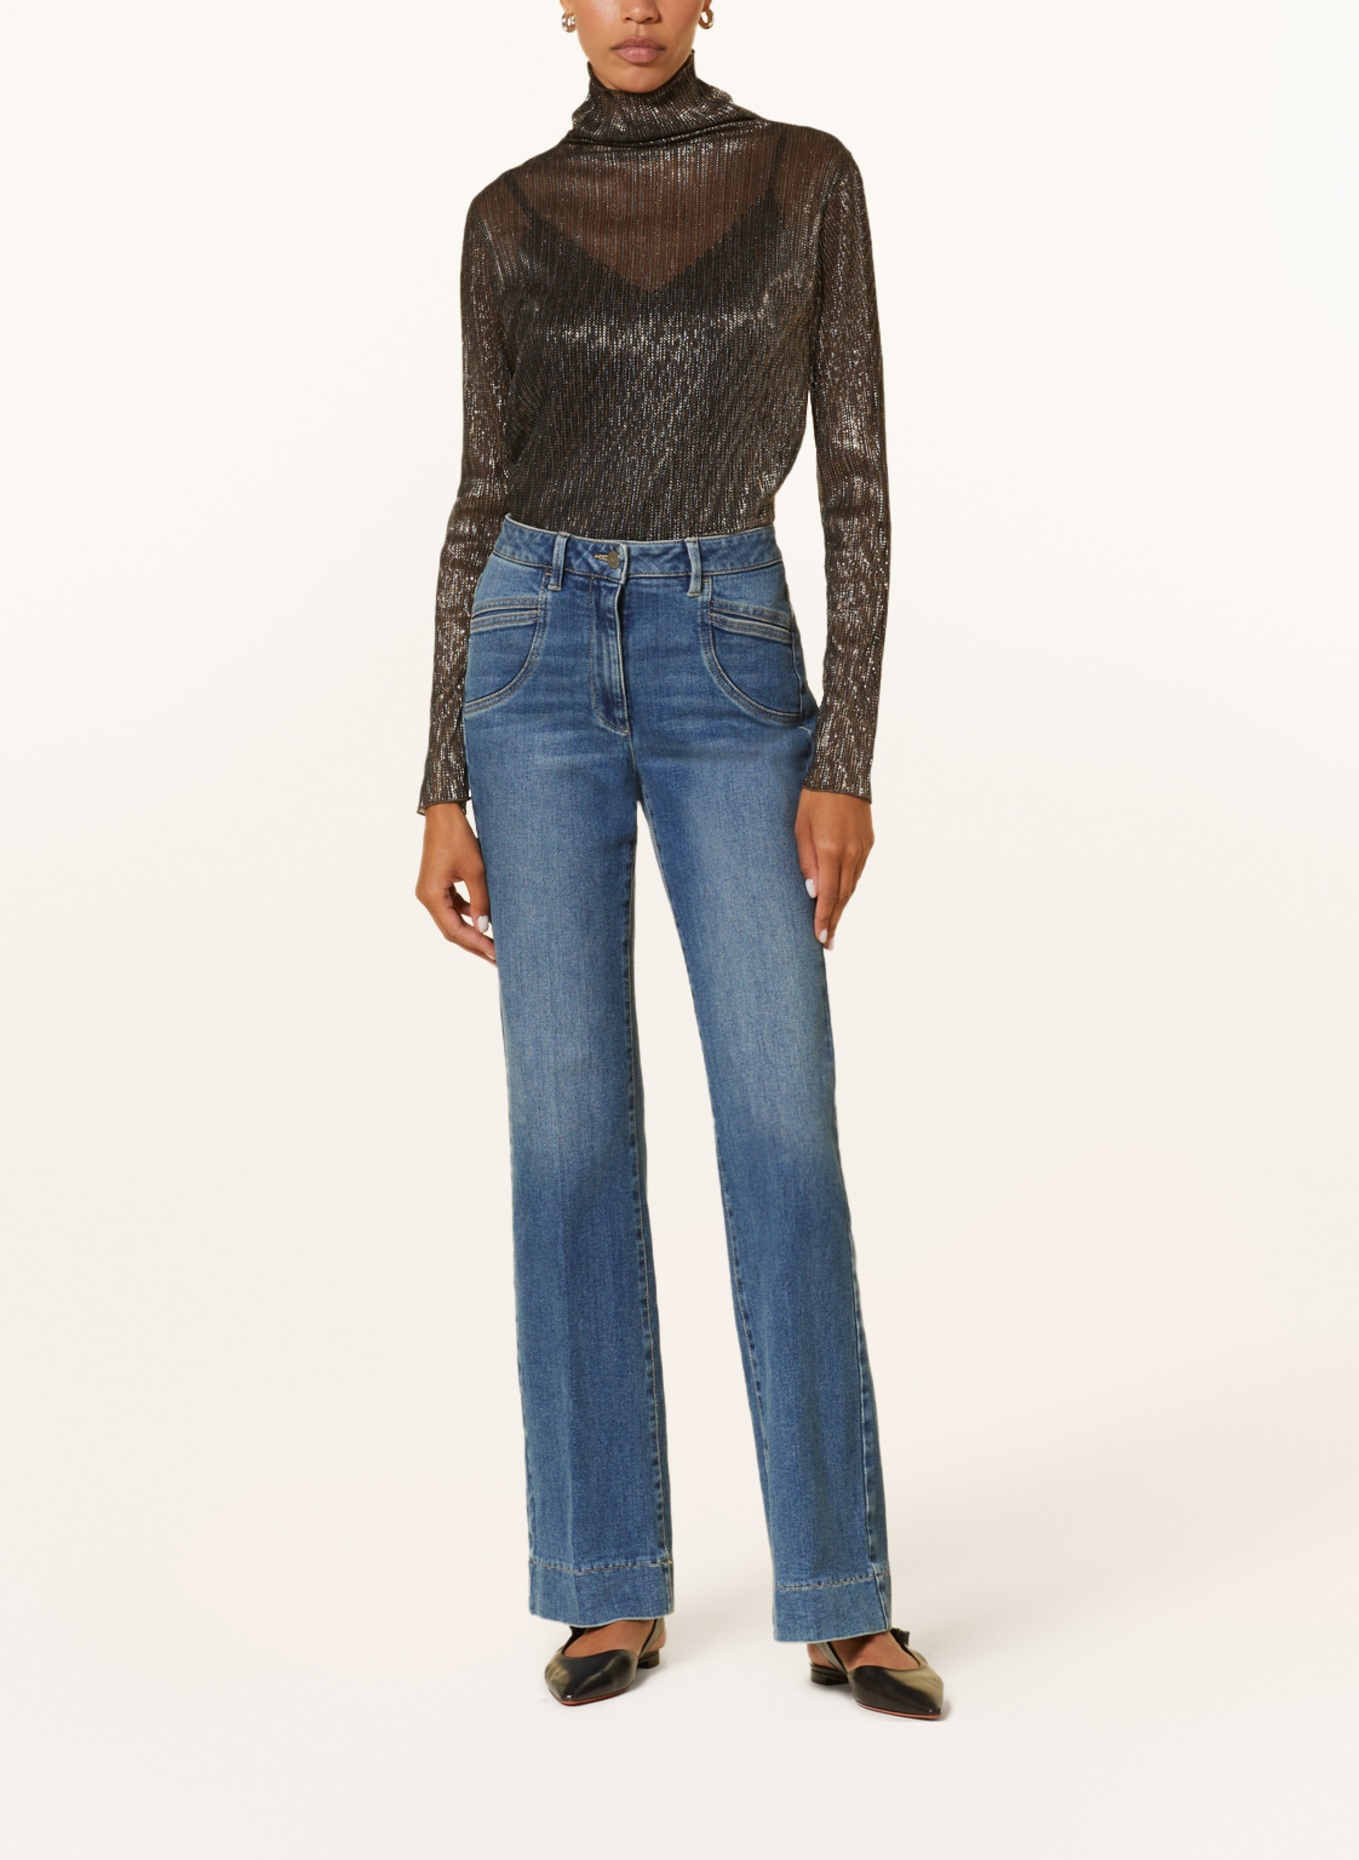 LUISA CERANO Long sleeve shirt with glitter thread, Color: BLACK/ GOLD/ SILVER (Image 2)